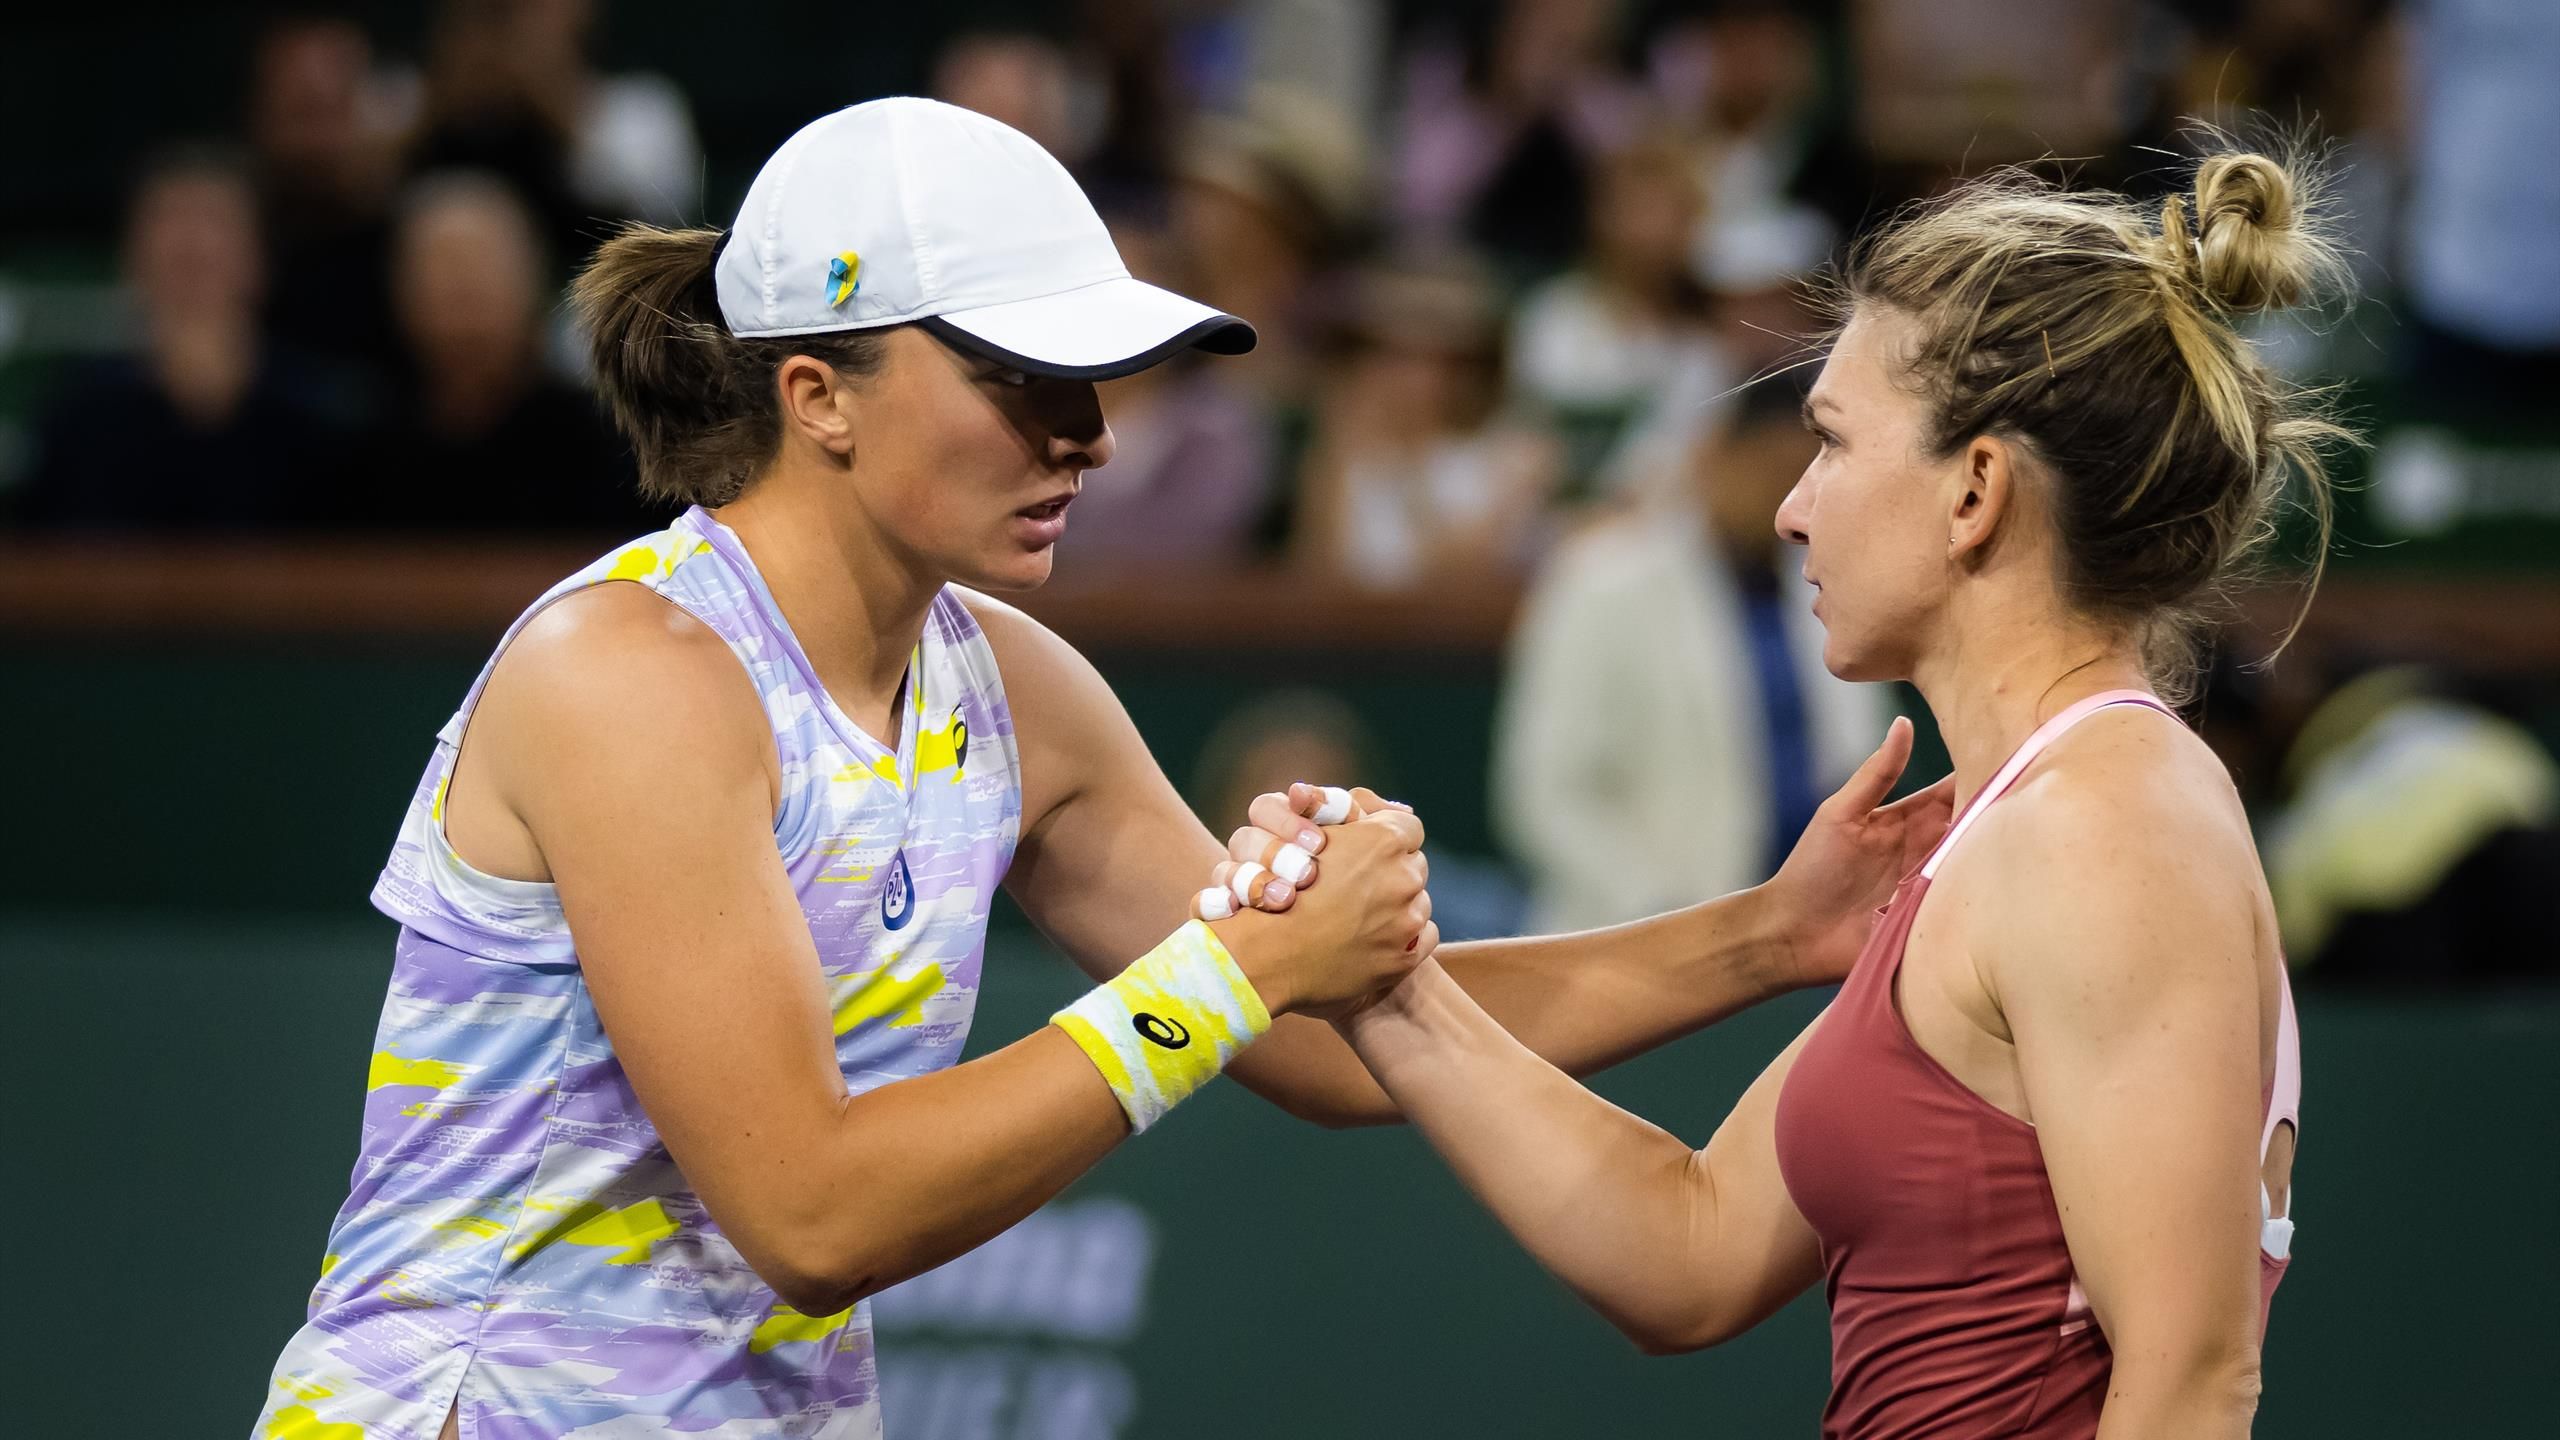 Iga Swiatek reacts to disappointing news of Simona Halep failing drugs test at US Open - WTA Finals Diary